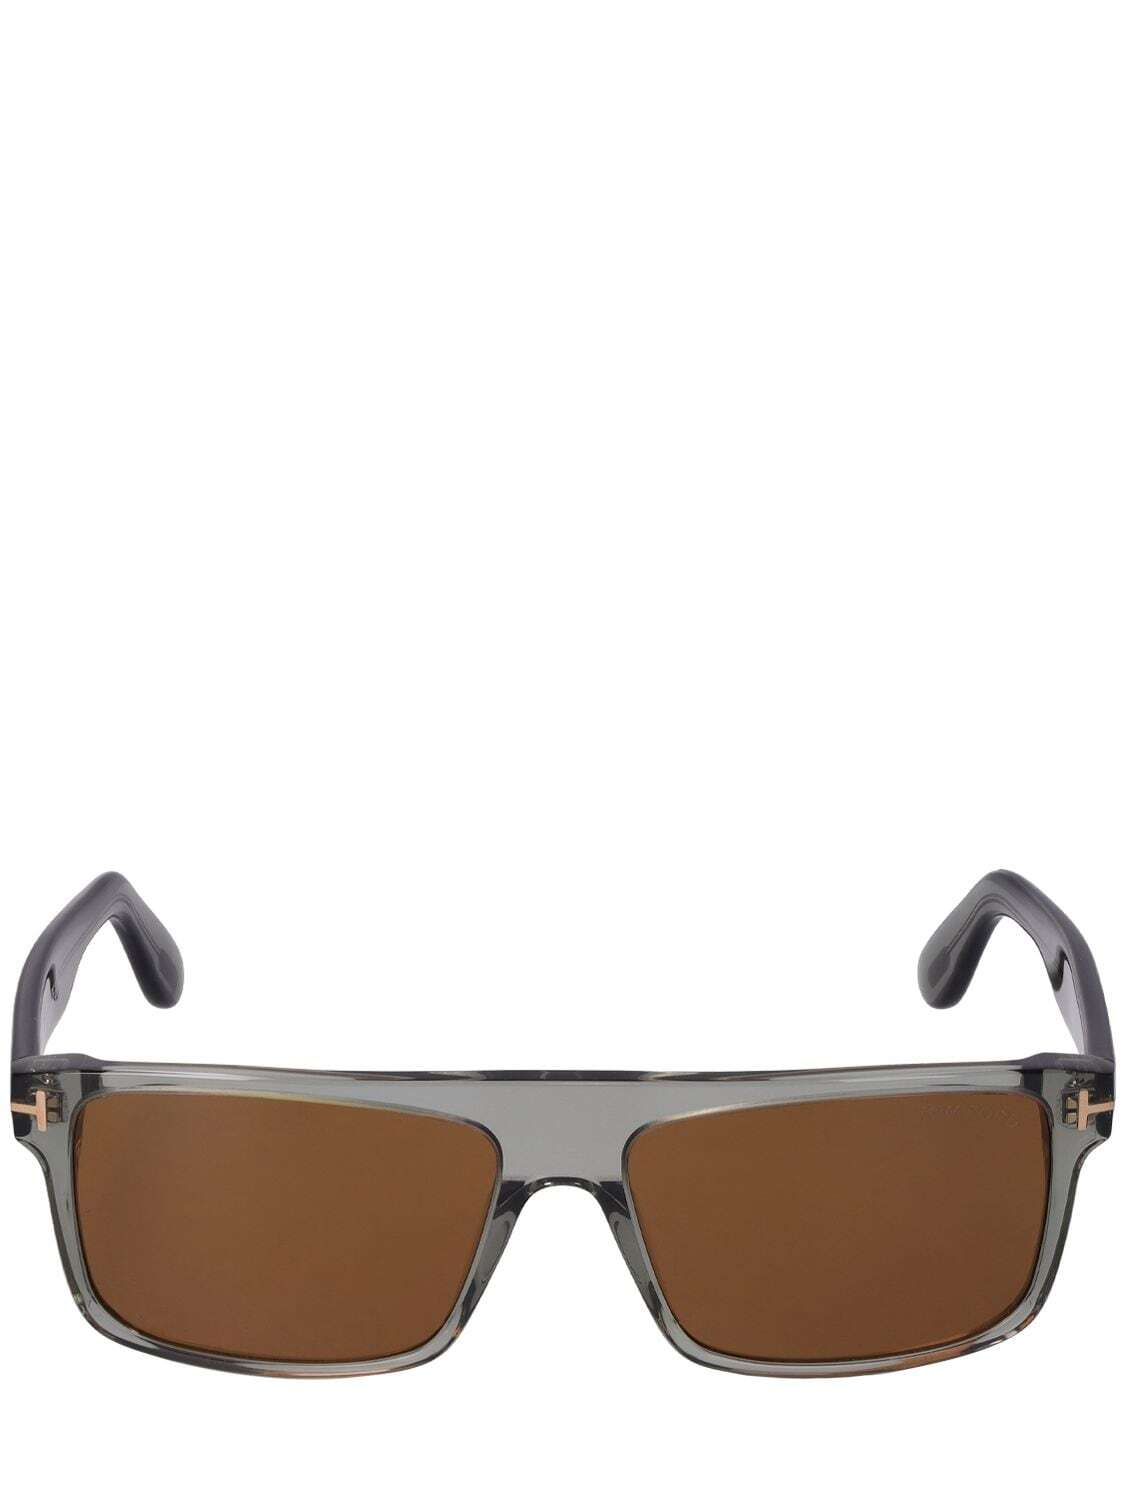 TOM FORD Philippe Squared Acetate Sunglasses in brown / grey